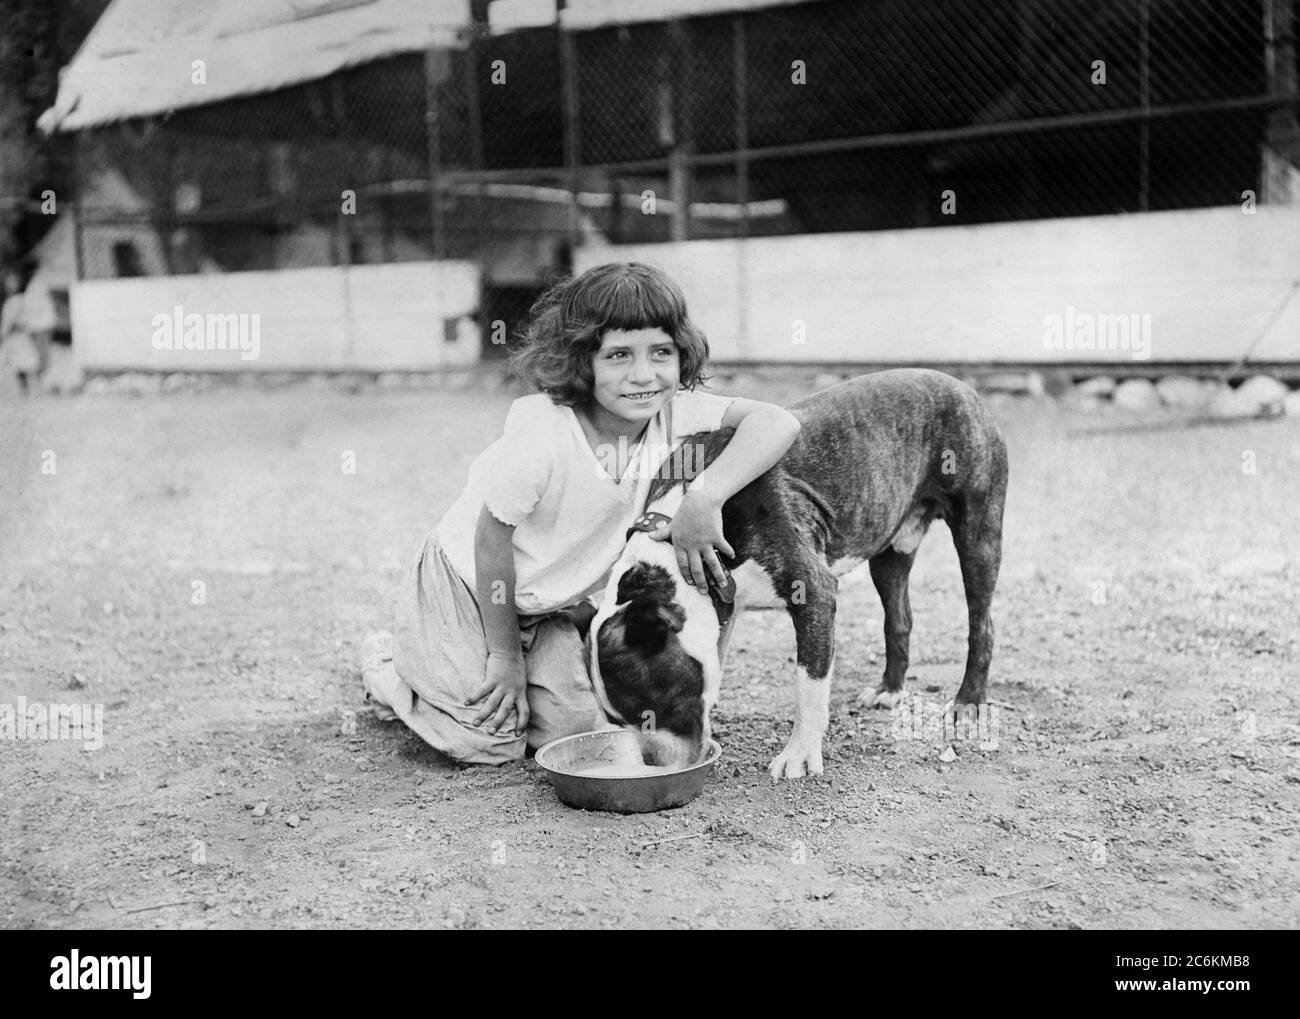 Young Girl with Dog, Kiddie Camp funded and maintained by American Red Cross, Santa Margarita Canyon, San Luis Obispo County, California, USA, American Red Cross Collection, September 1920 Stock Photo